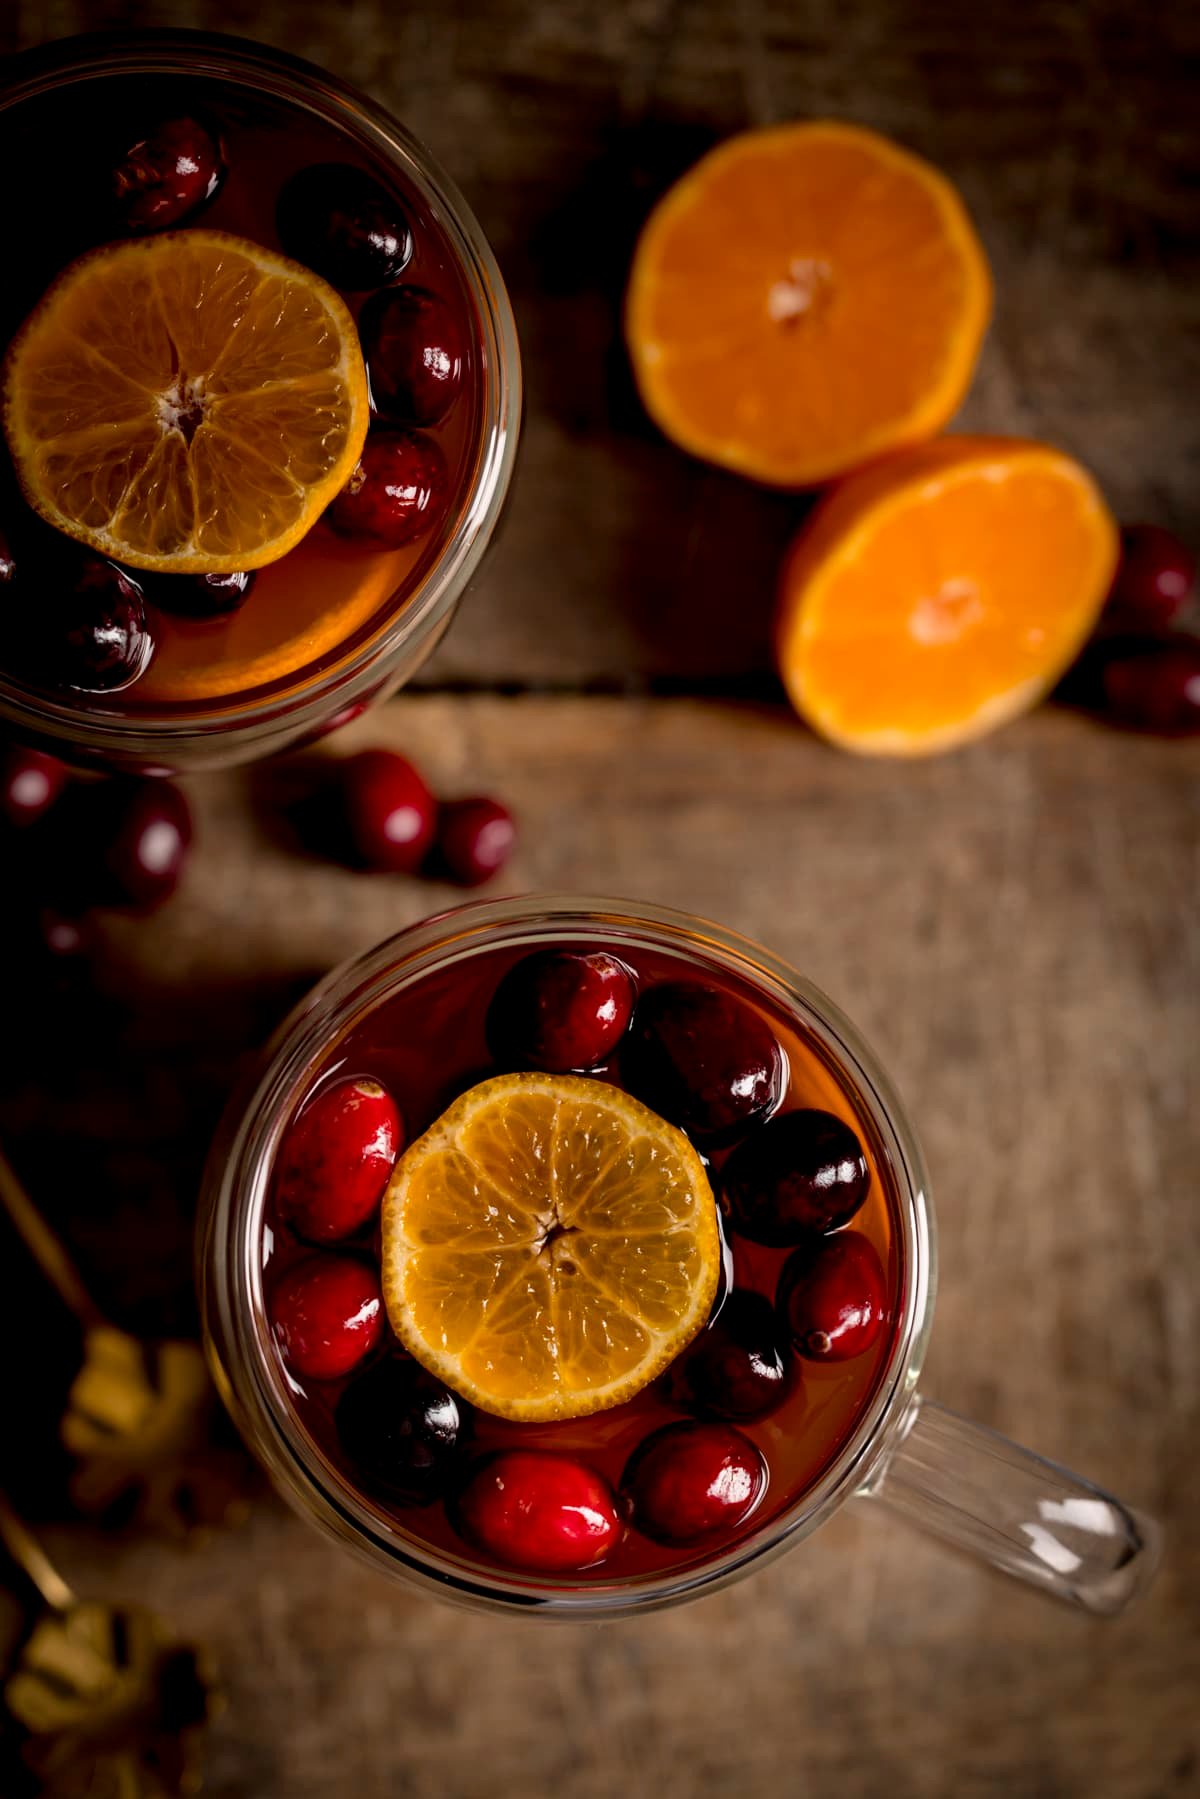 Overhead image of two glass mugs filled with mulled cider, cranberries and clementine slices on a wooden table. There is a clementine sliced in half next to the mugs.